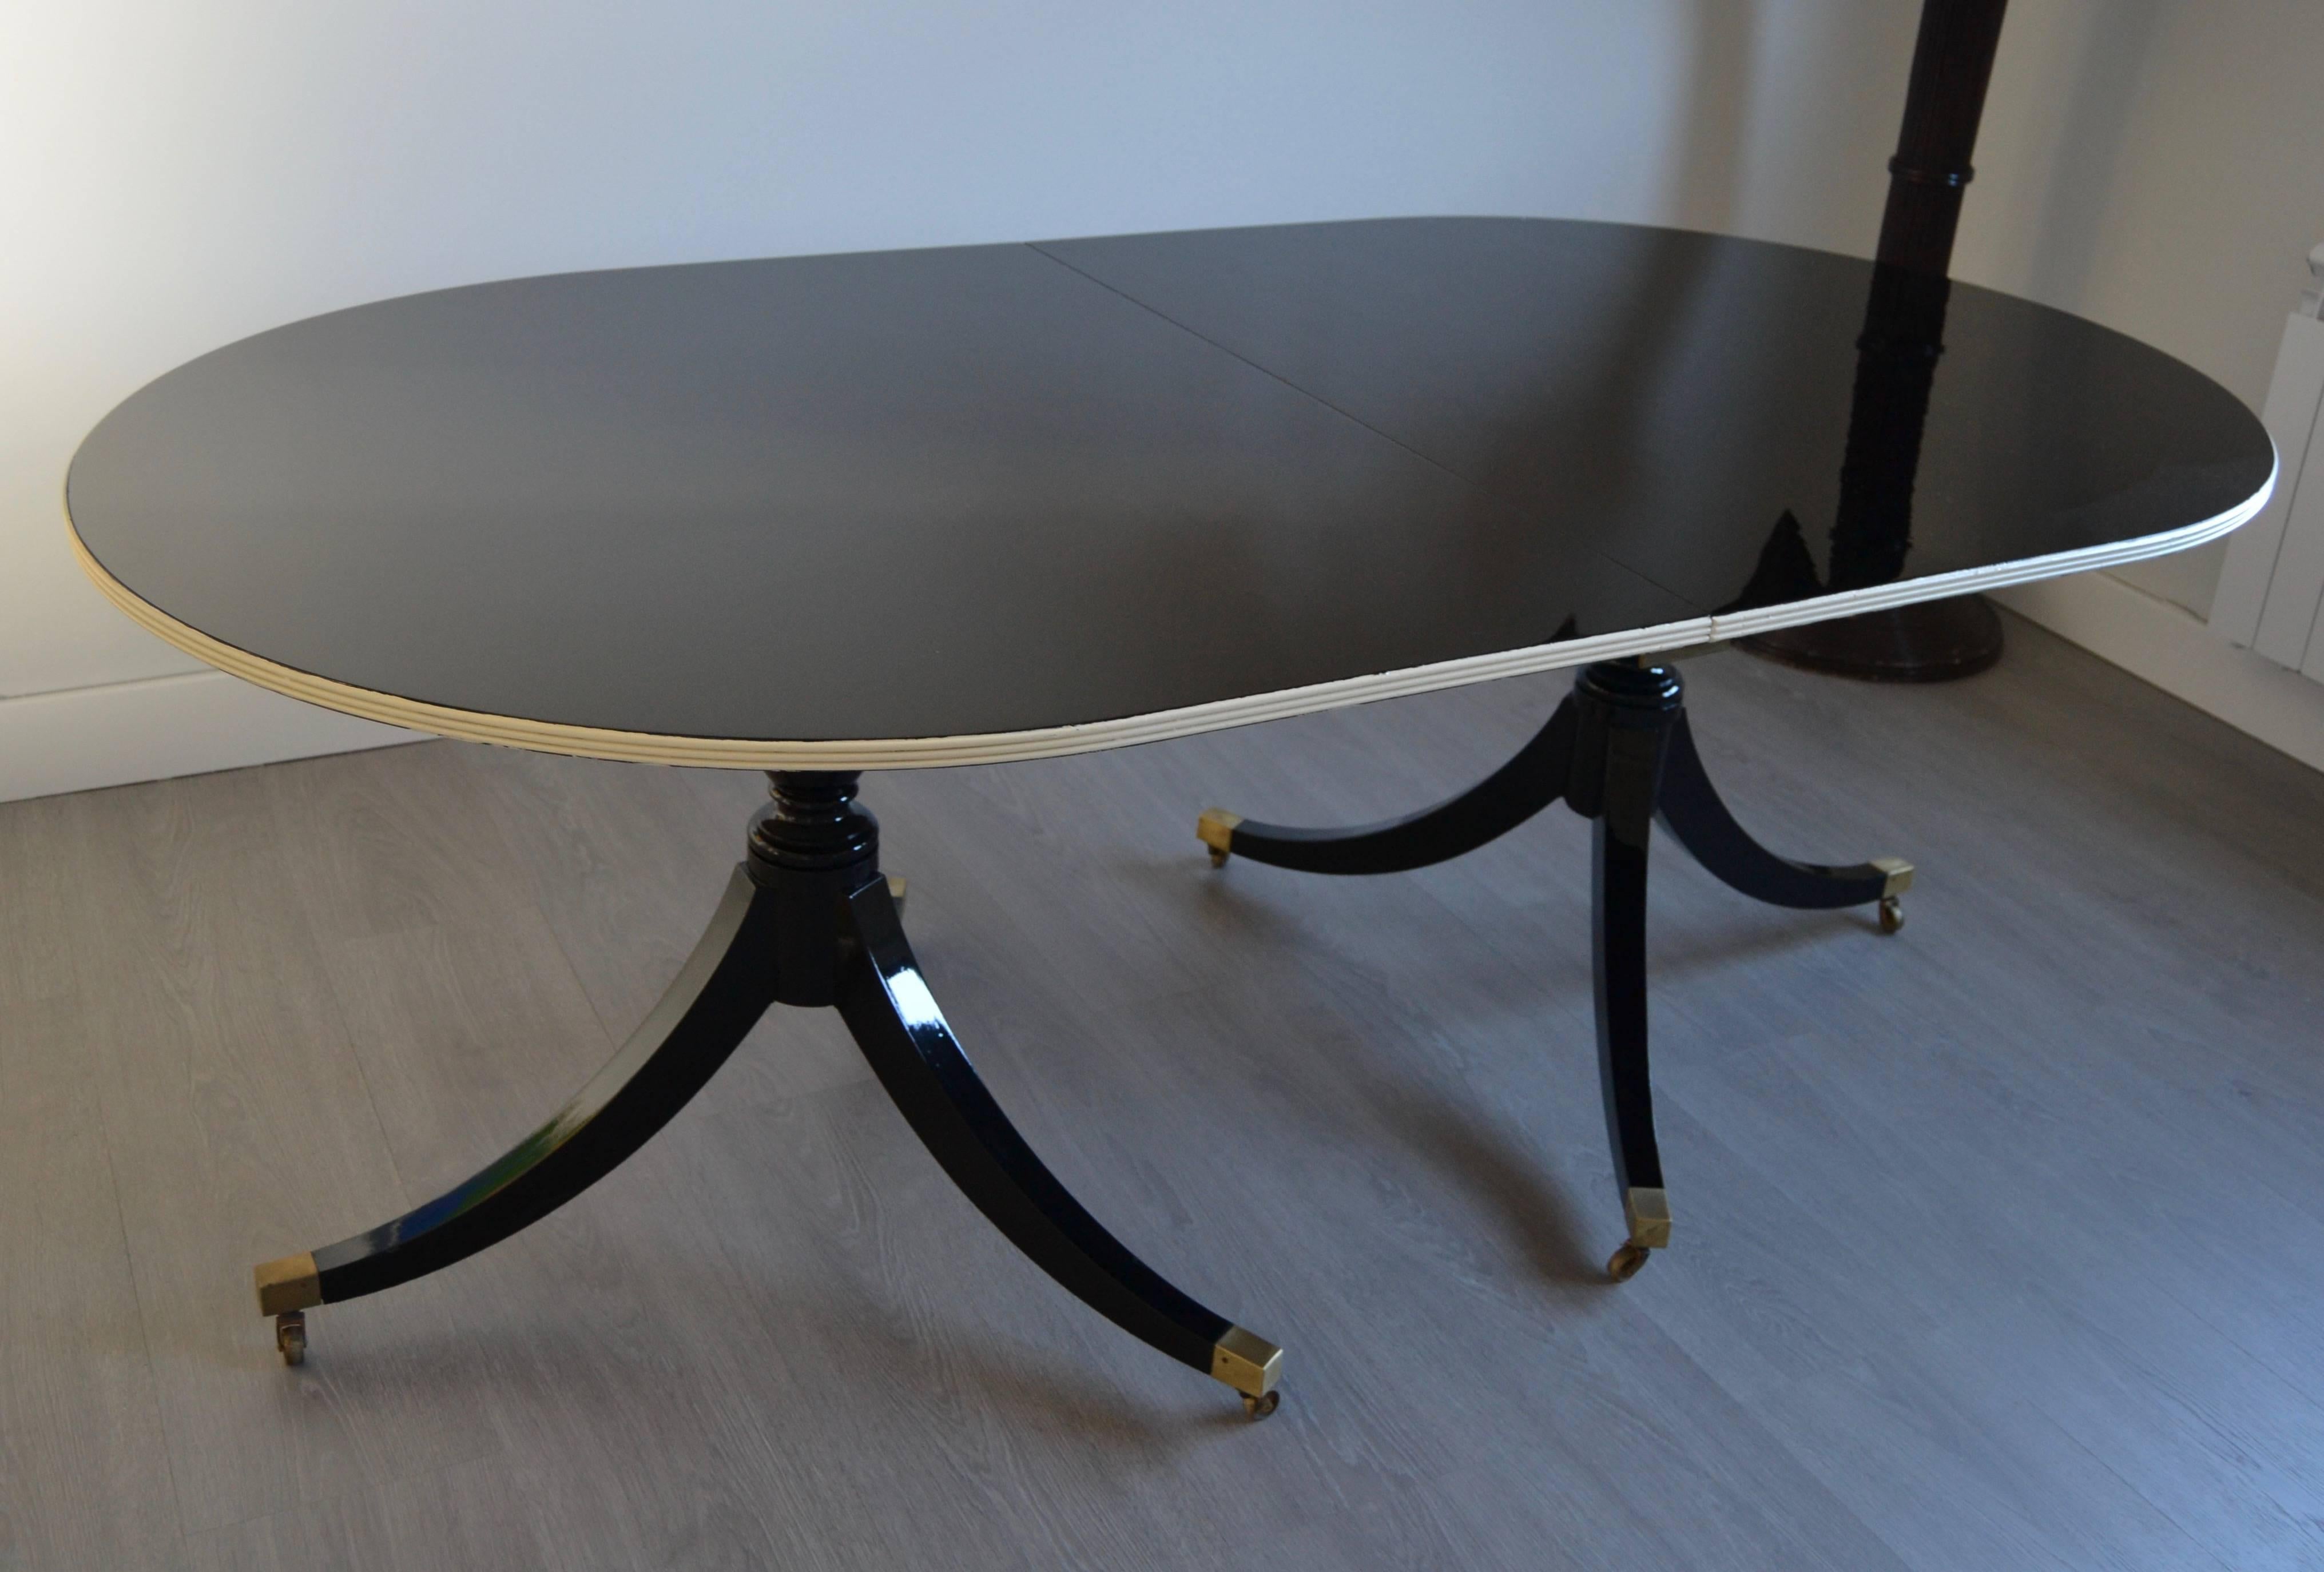 1950s mahogany black relacquered top and feet with yvory edge oval table by Mason Jansen. The table is signed by Jansen under top surface and 
bronze detailm and small wheels.
One extension leaf of 50 cm. Set on casters.
Documented on Jansen Book by